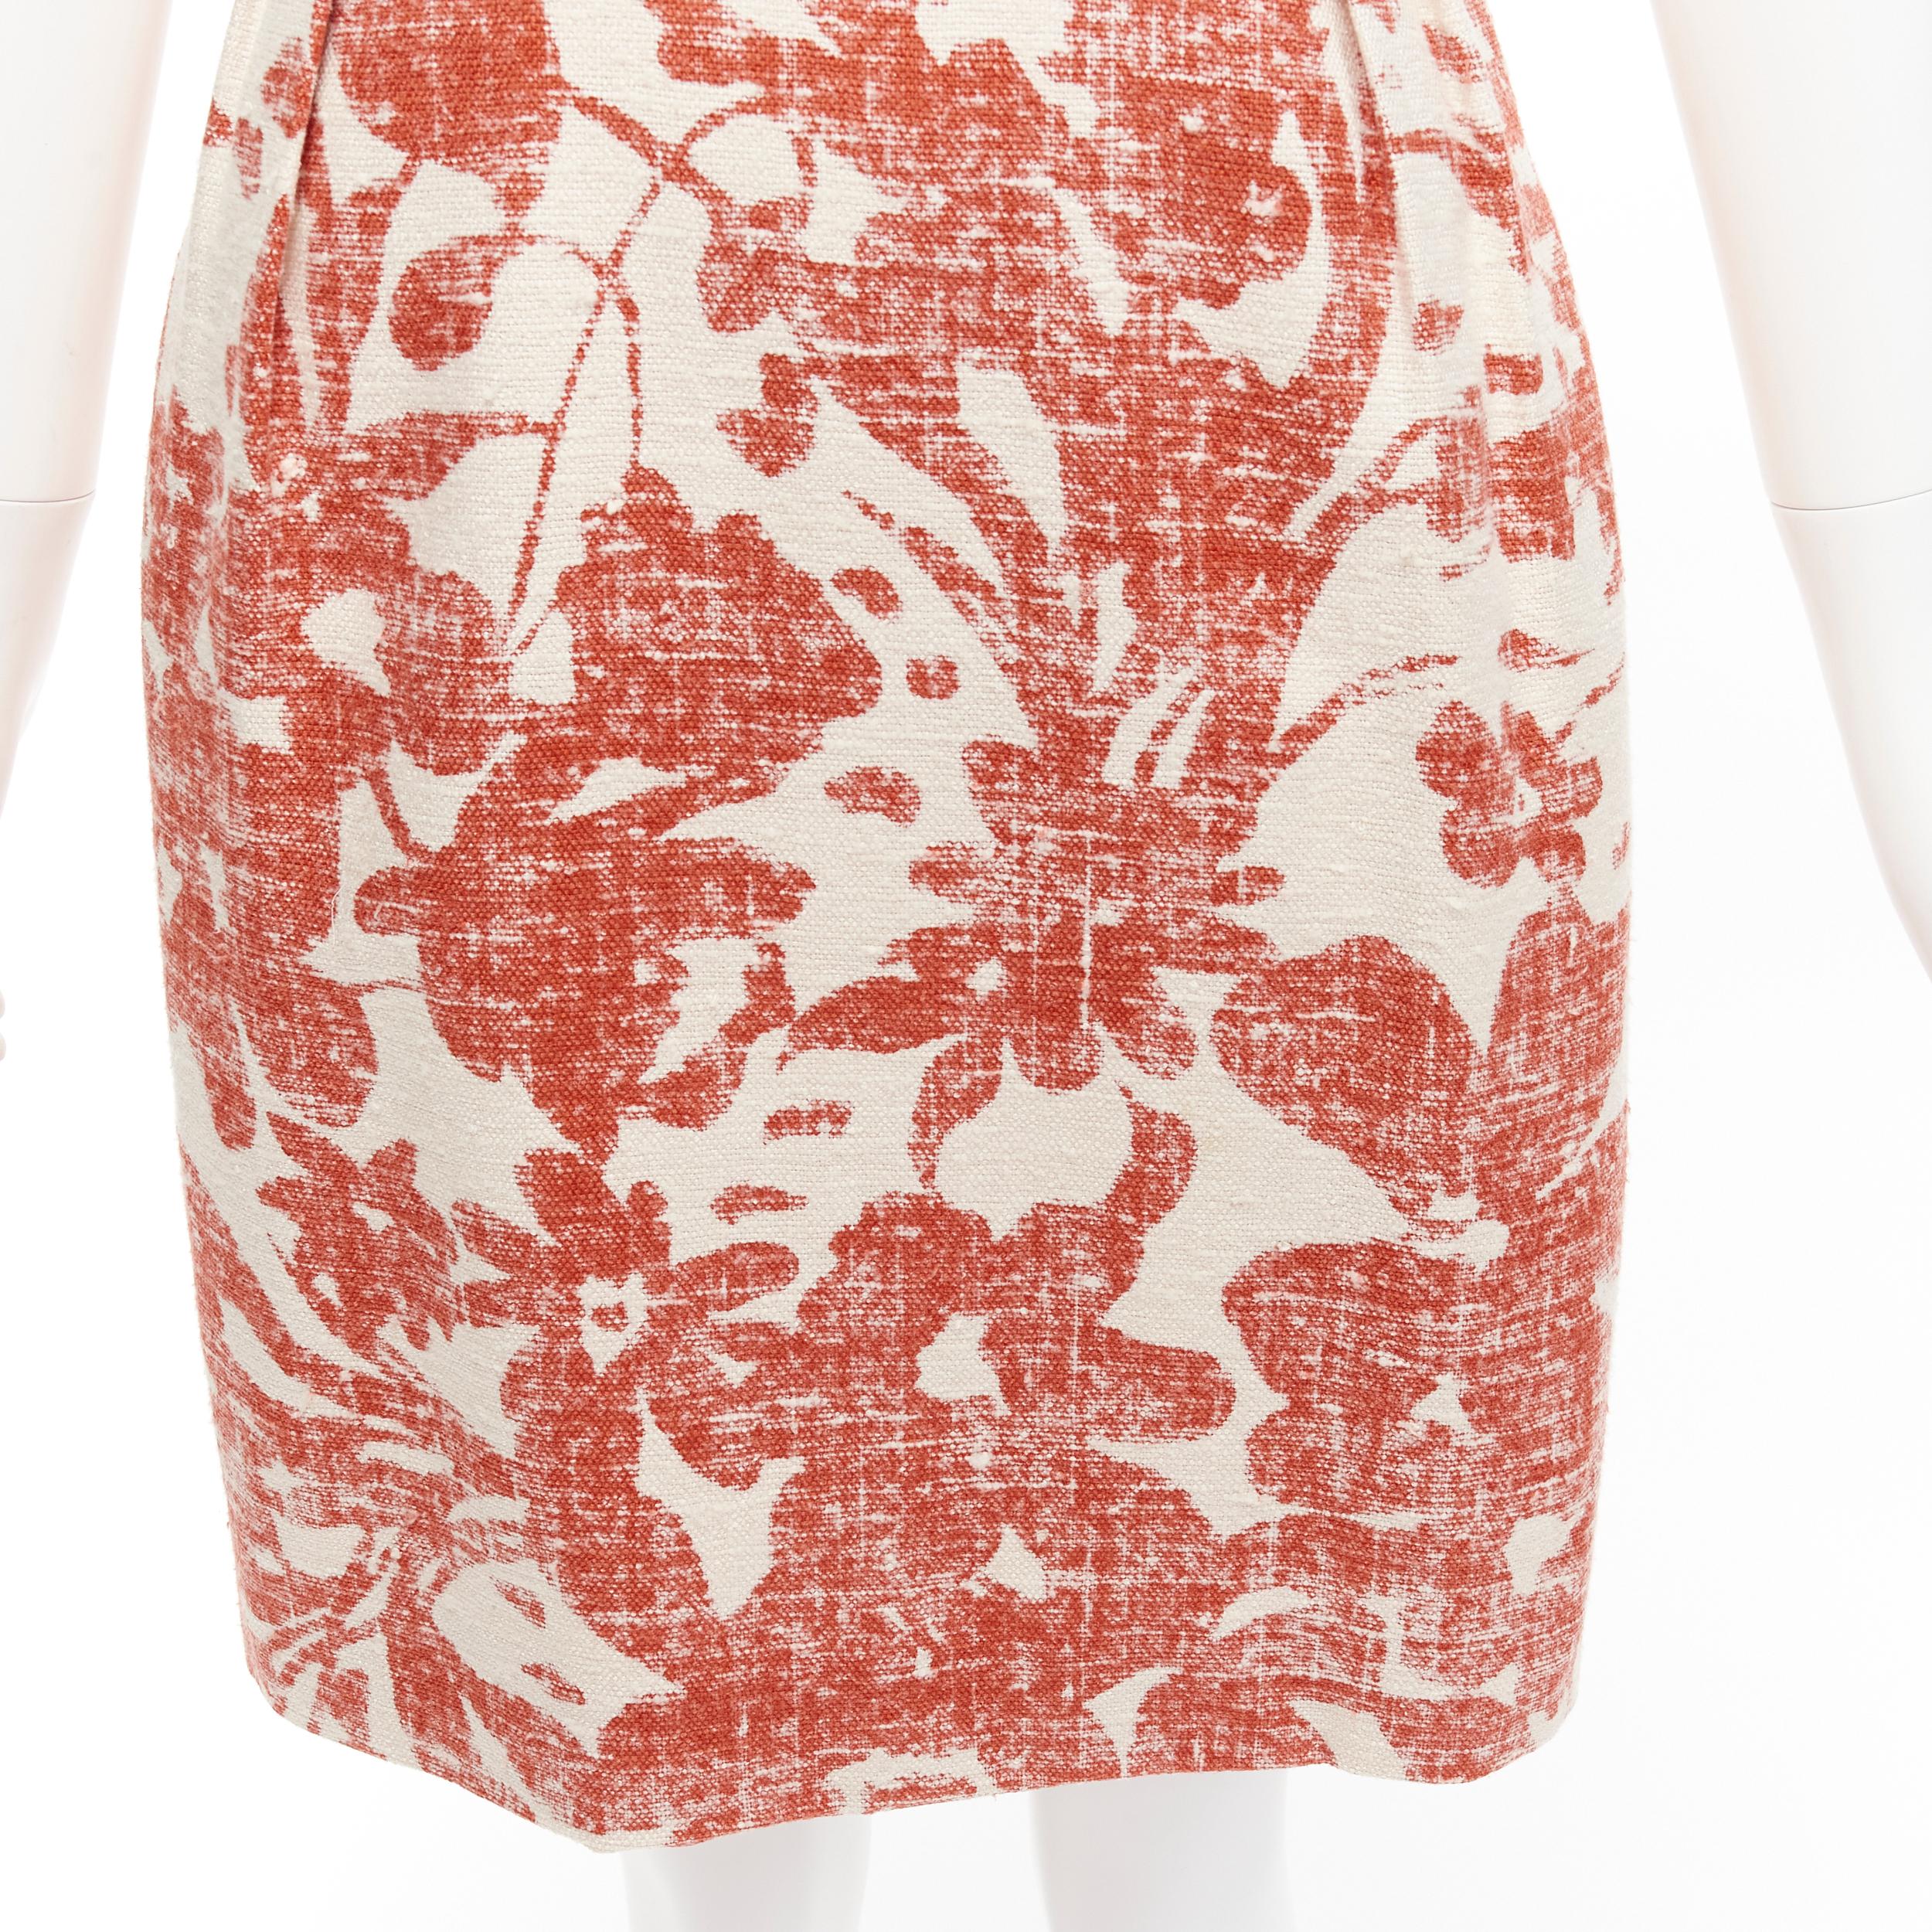 MONIQUE LHUILLIER cream red floral embellished collar sheath dress For Sale 3